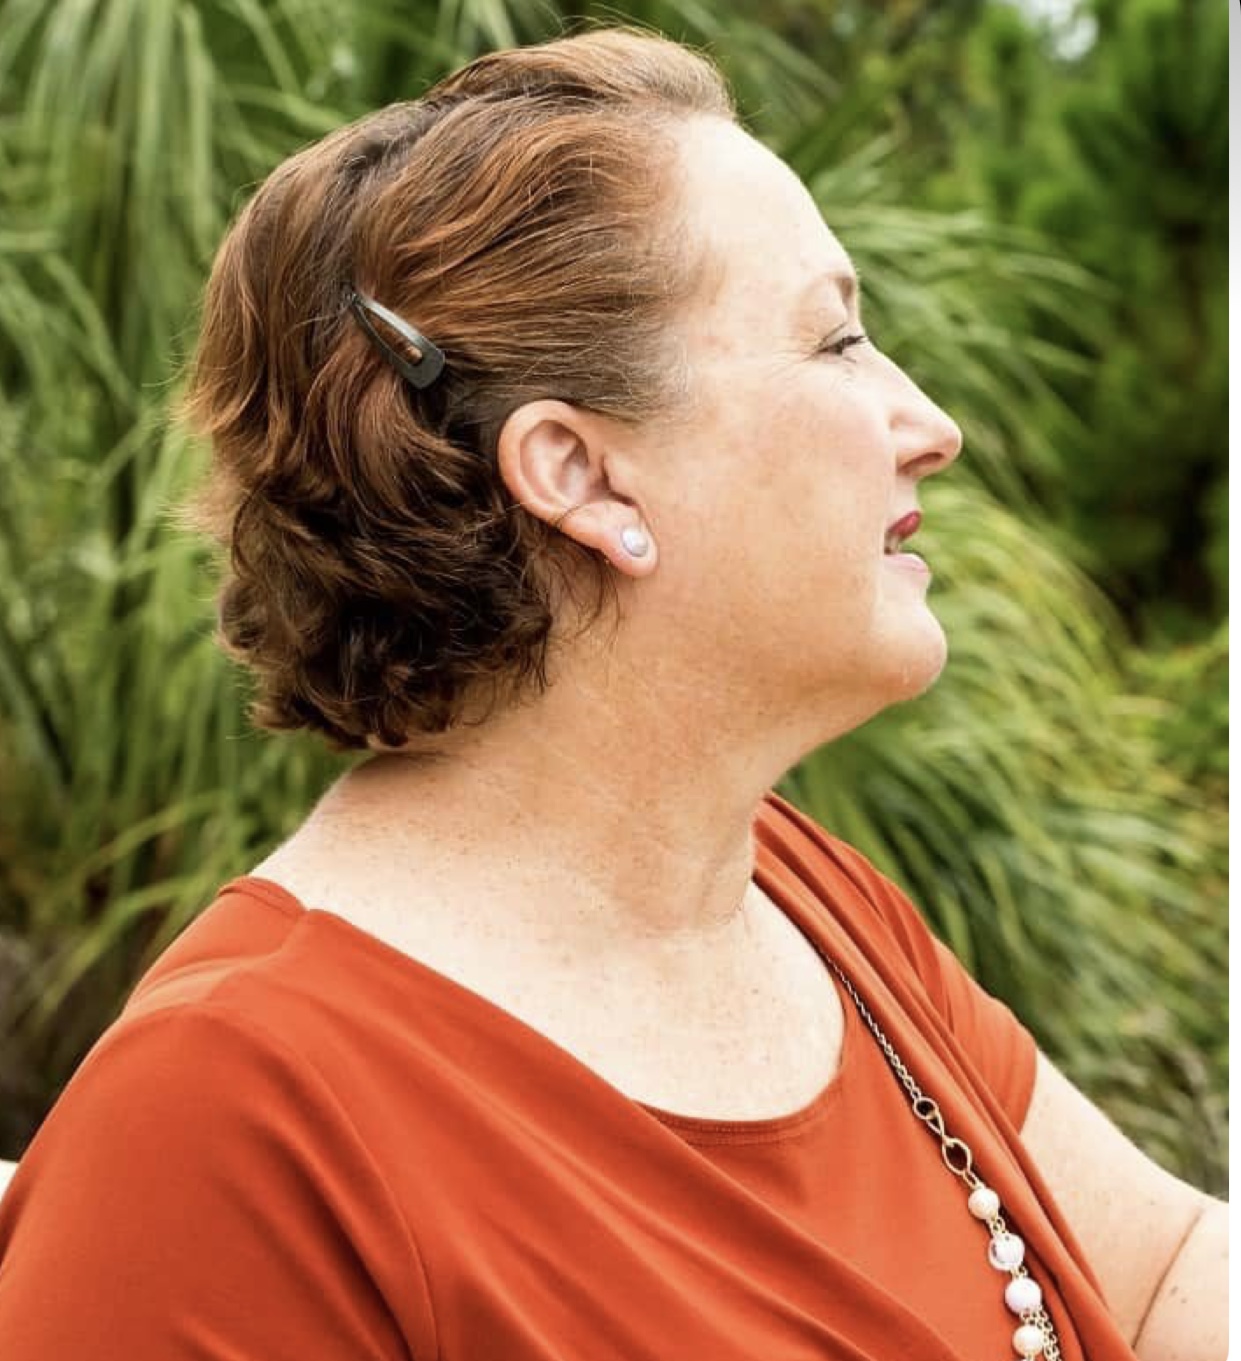 Plus Size Hairstyles For Over 50 And Overweight